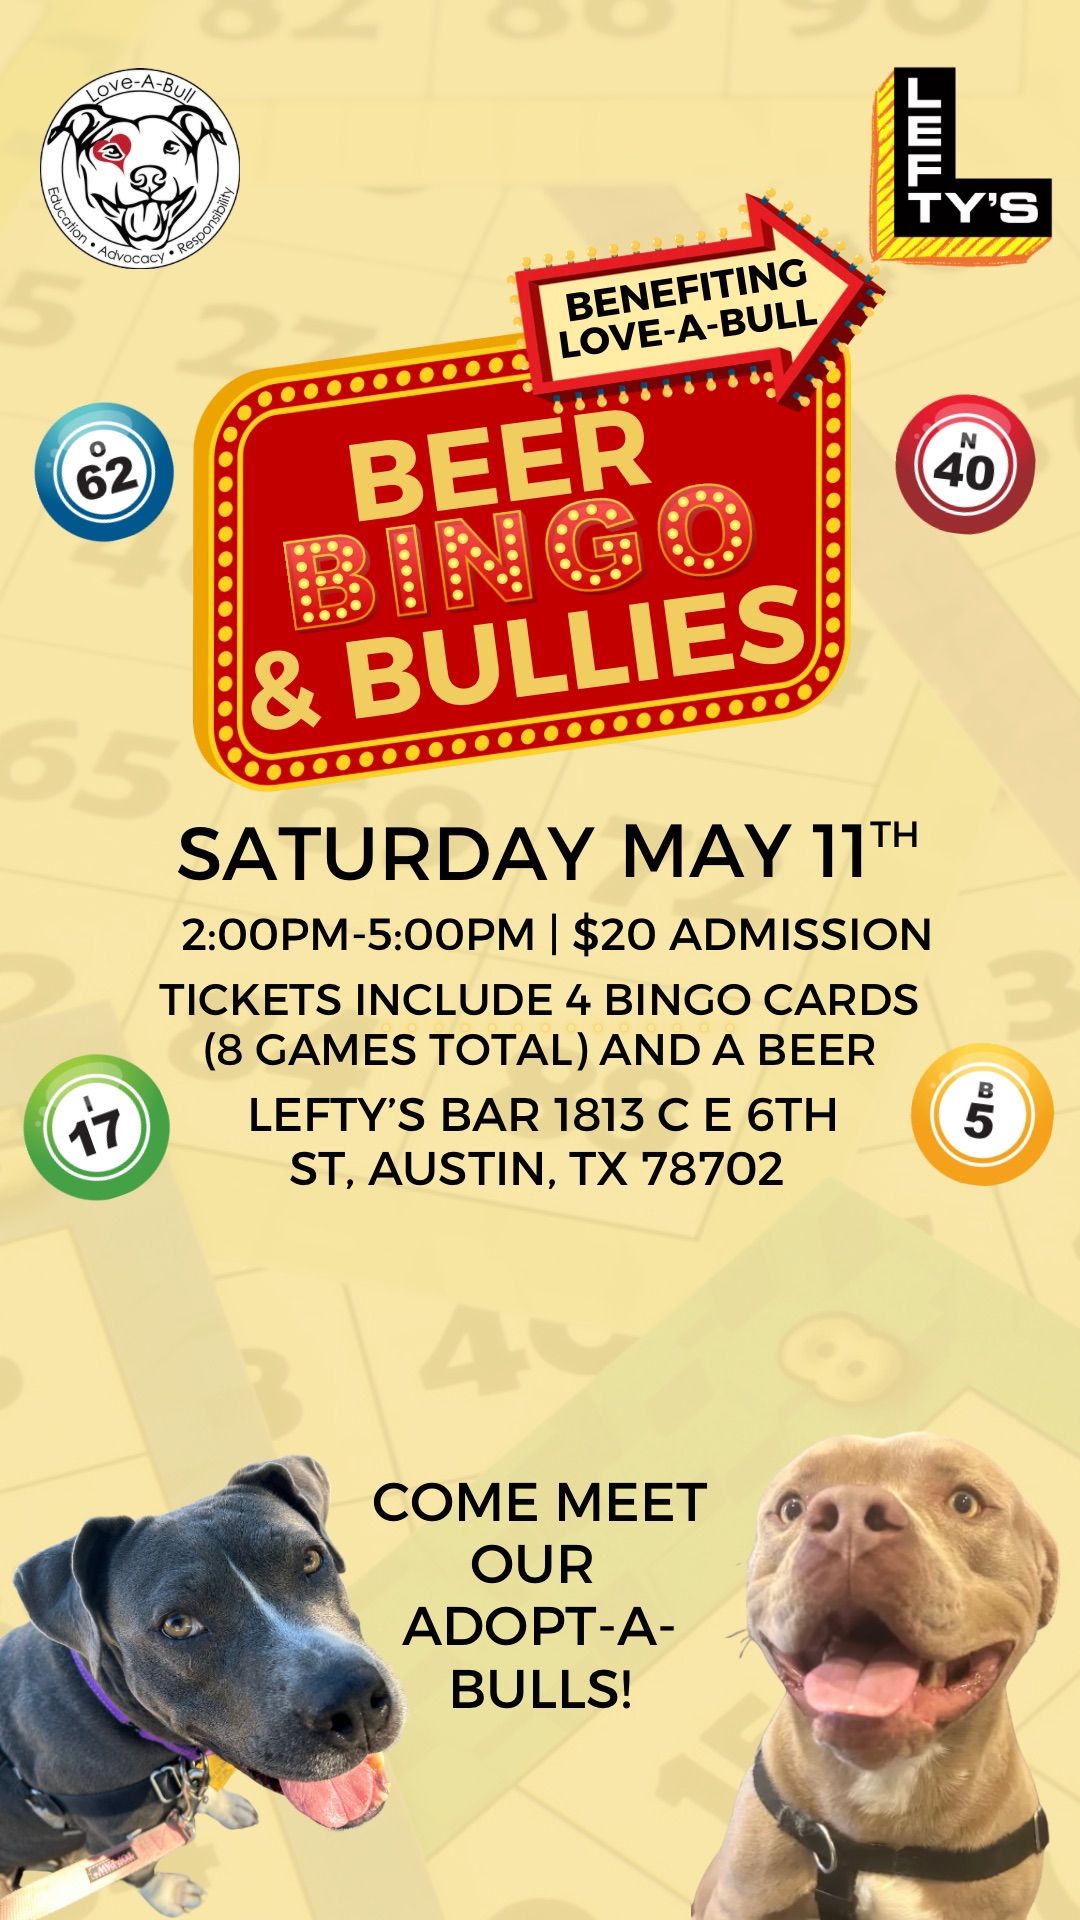 Beer and Bingo with Love-A-Bull